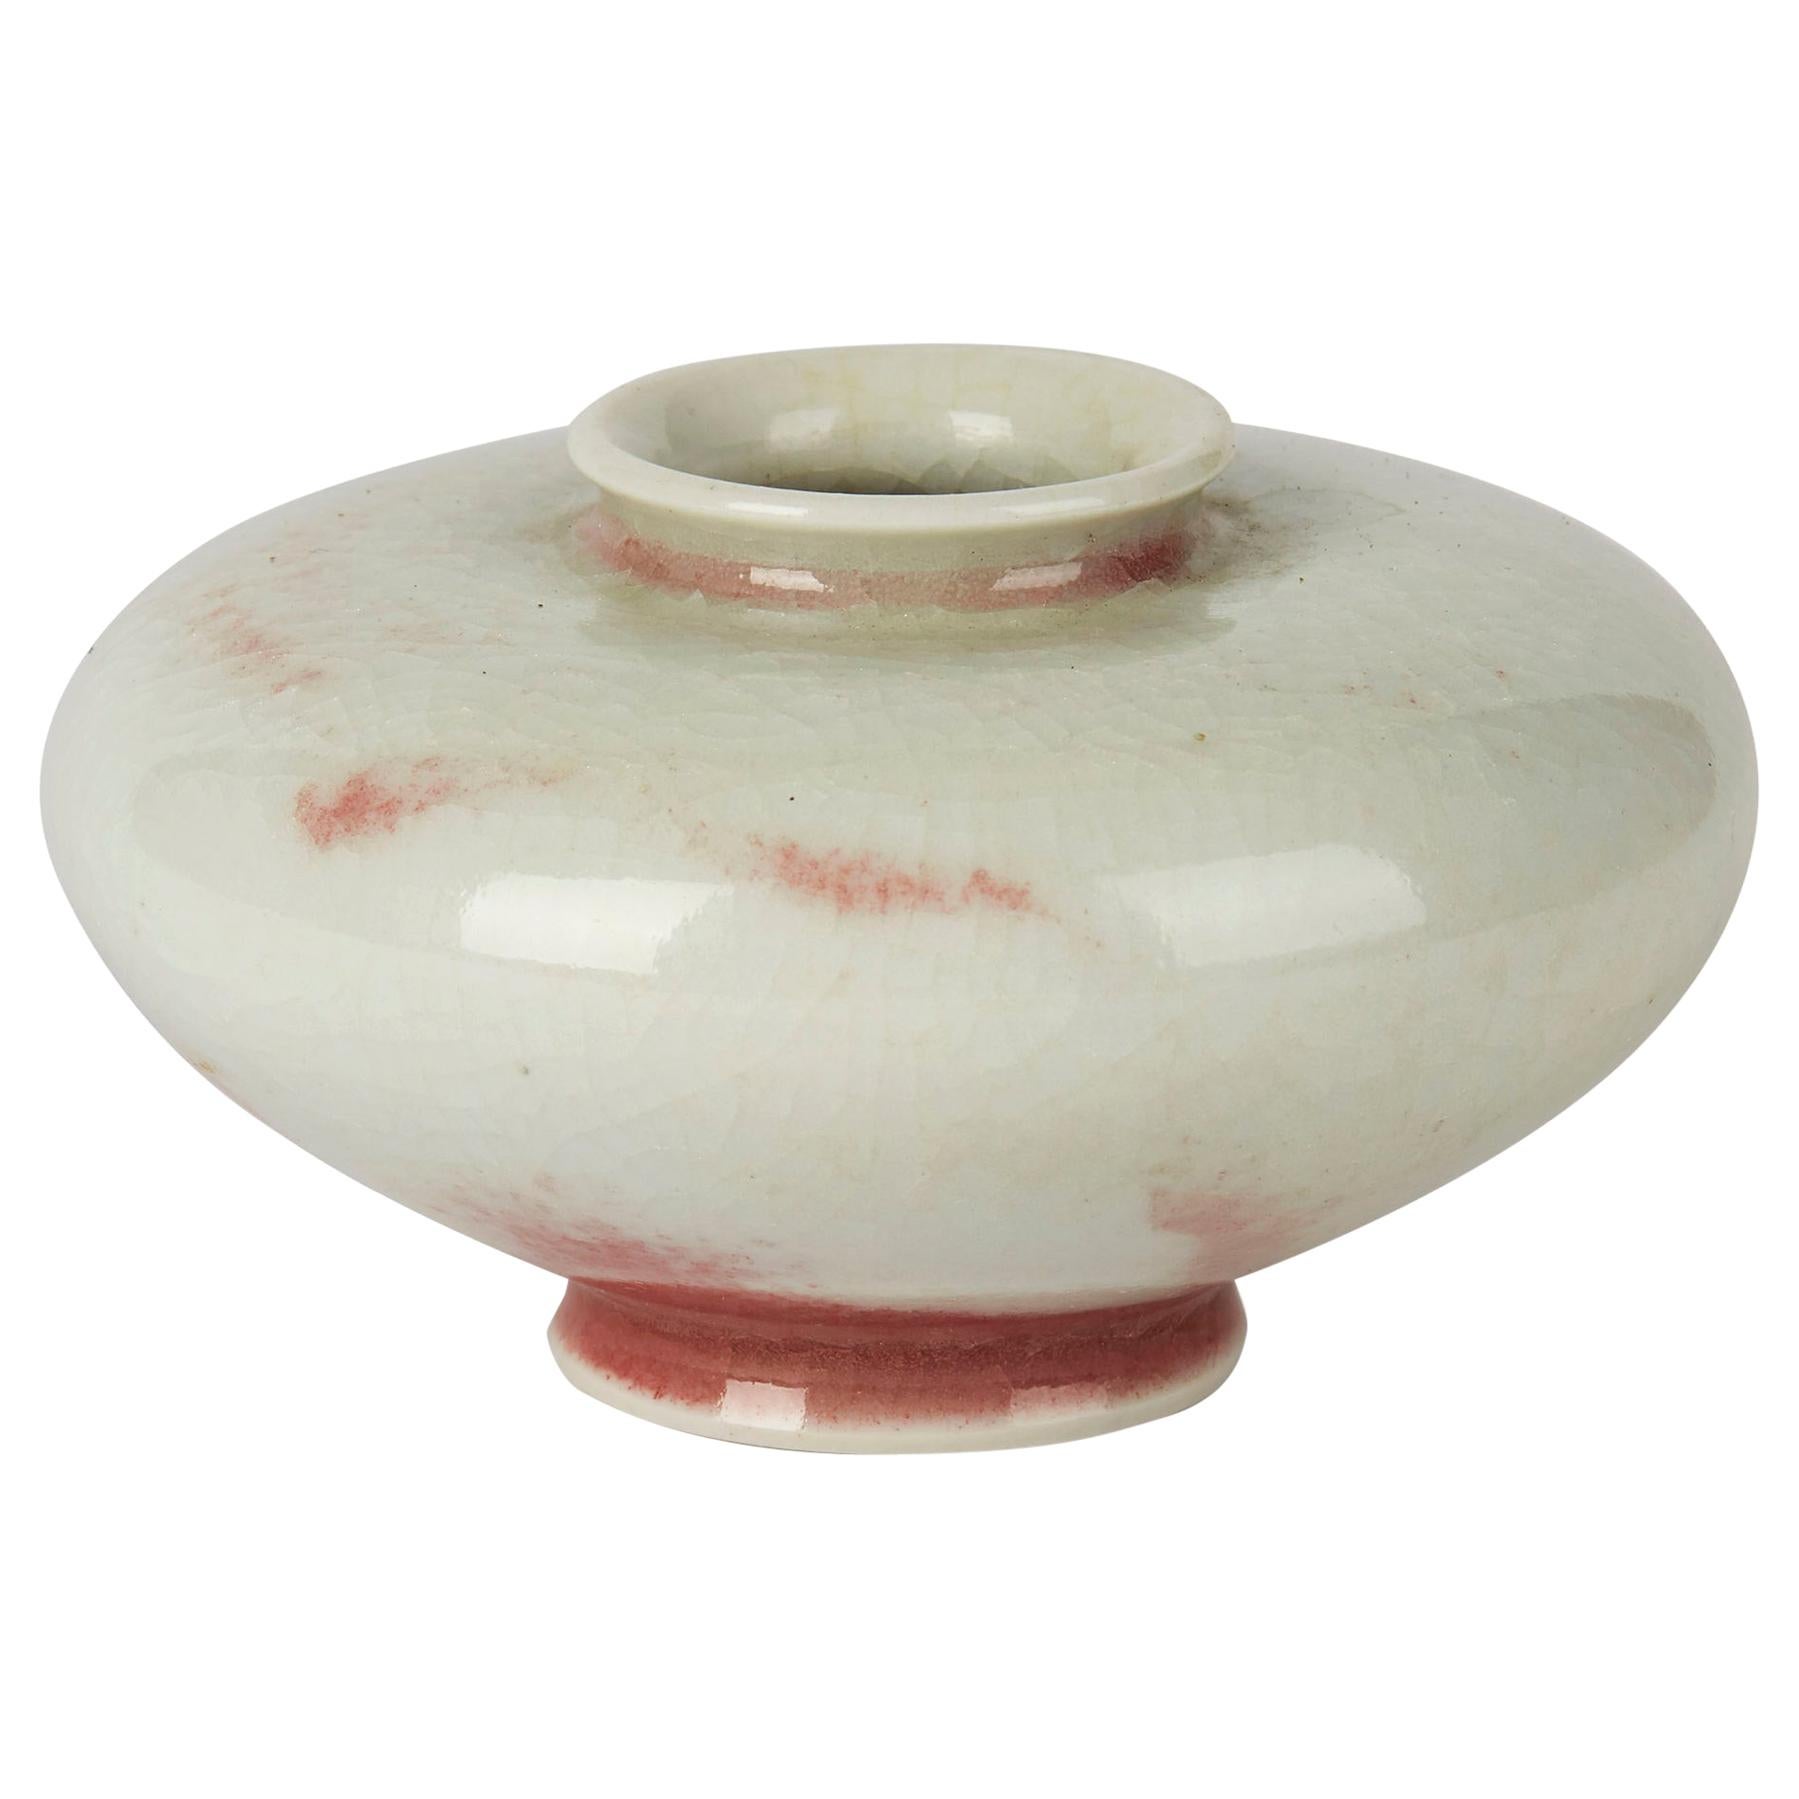 William Mehornay Studio Pottery Porcelain Red and White Vase, 1980-1985 For Sale